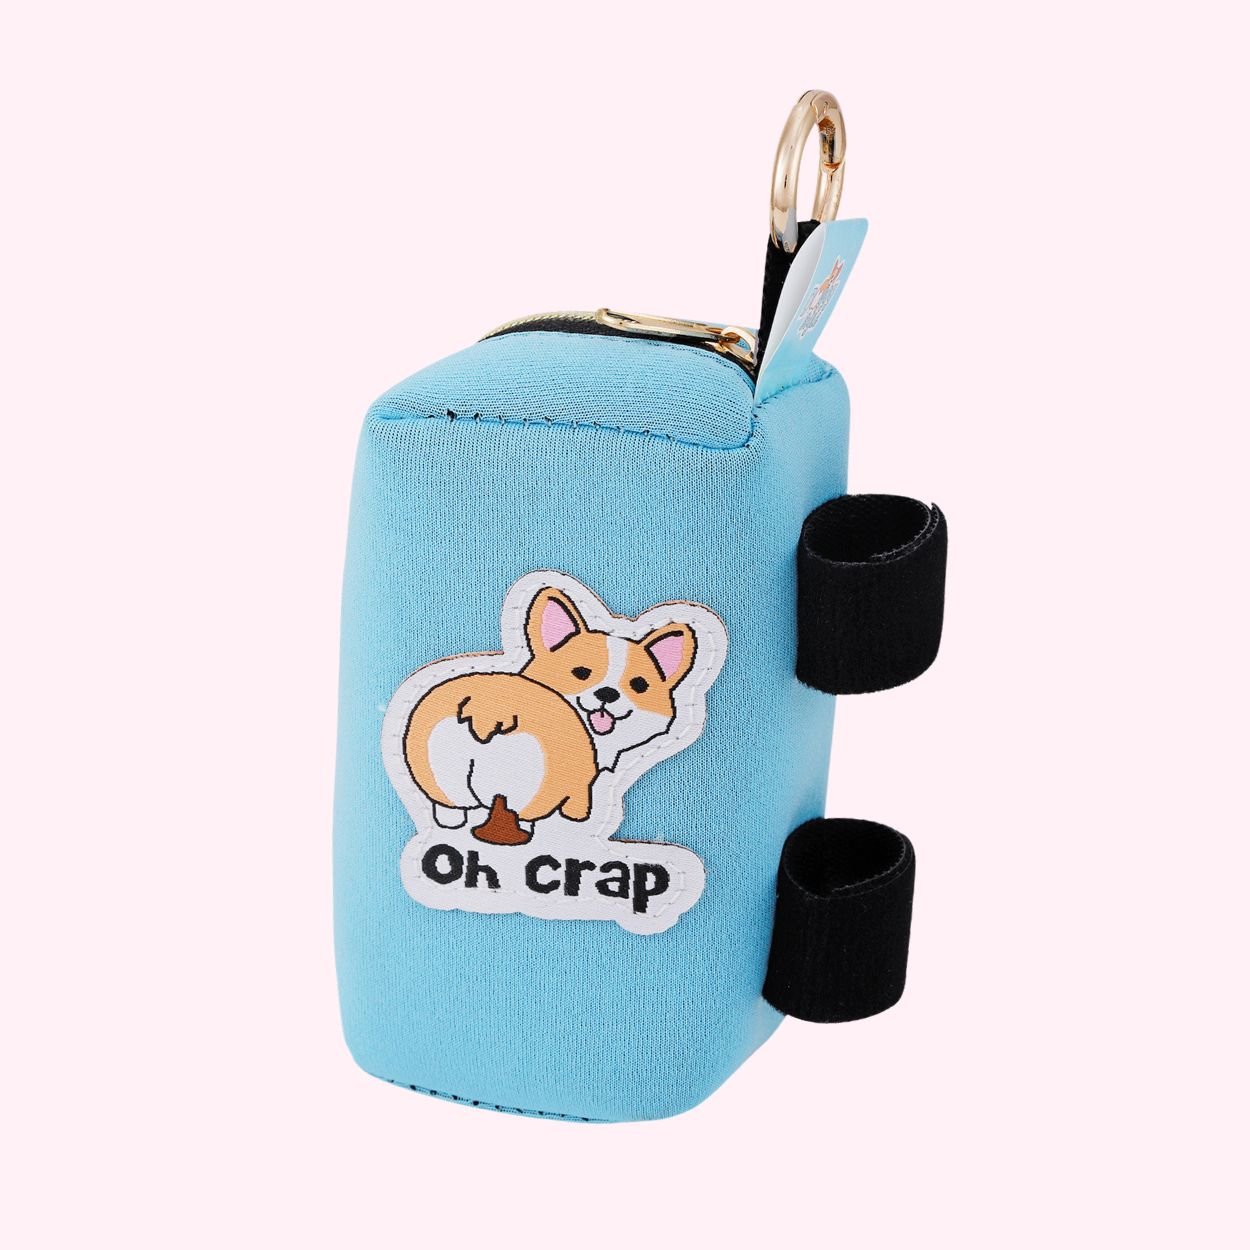 Poop Bag Dispenser - "Oh Crap" - Doggy Style Pet Accessories